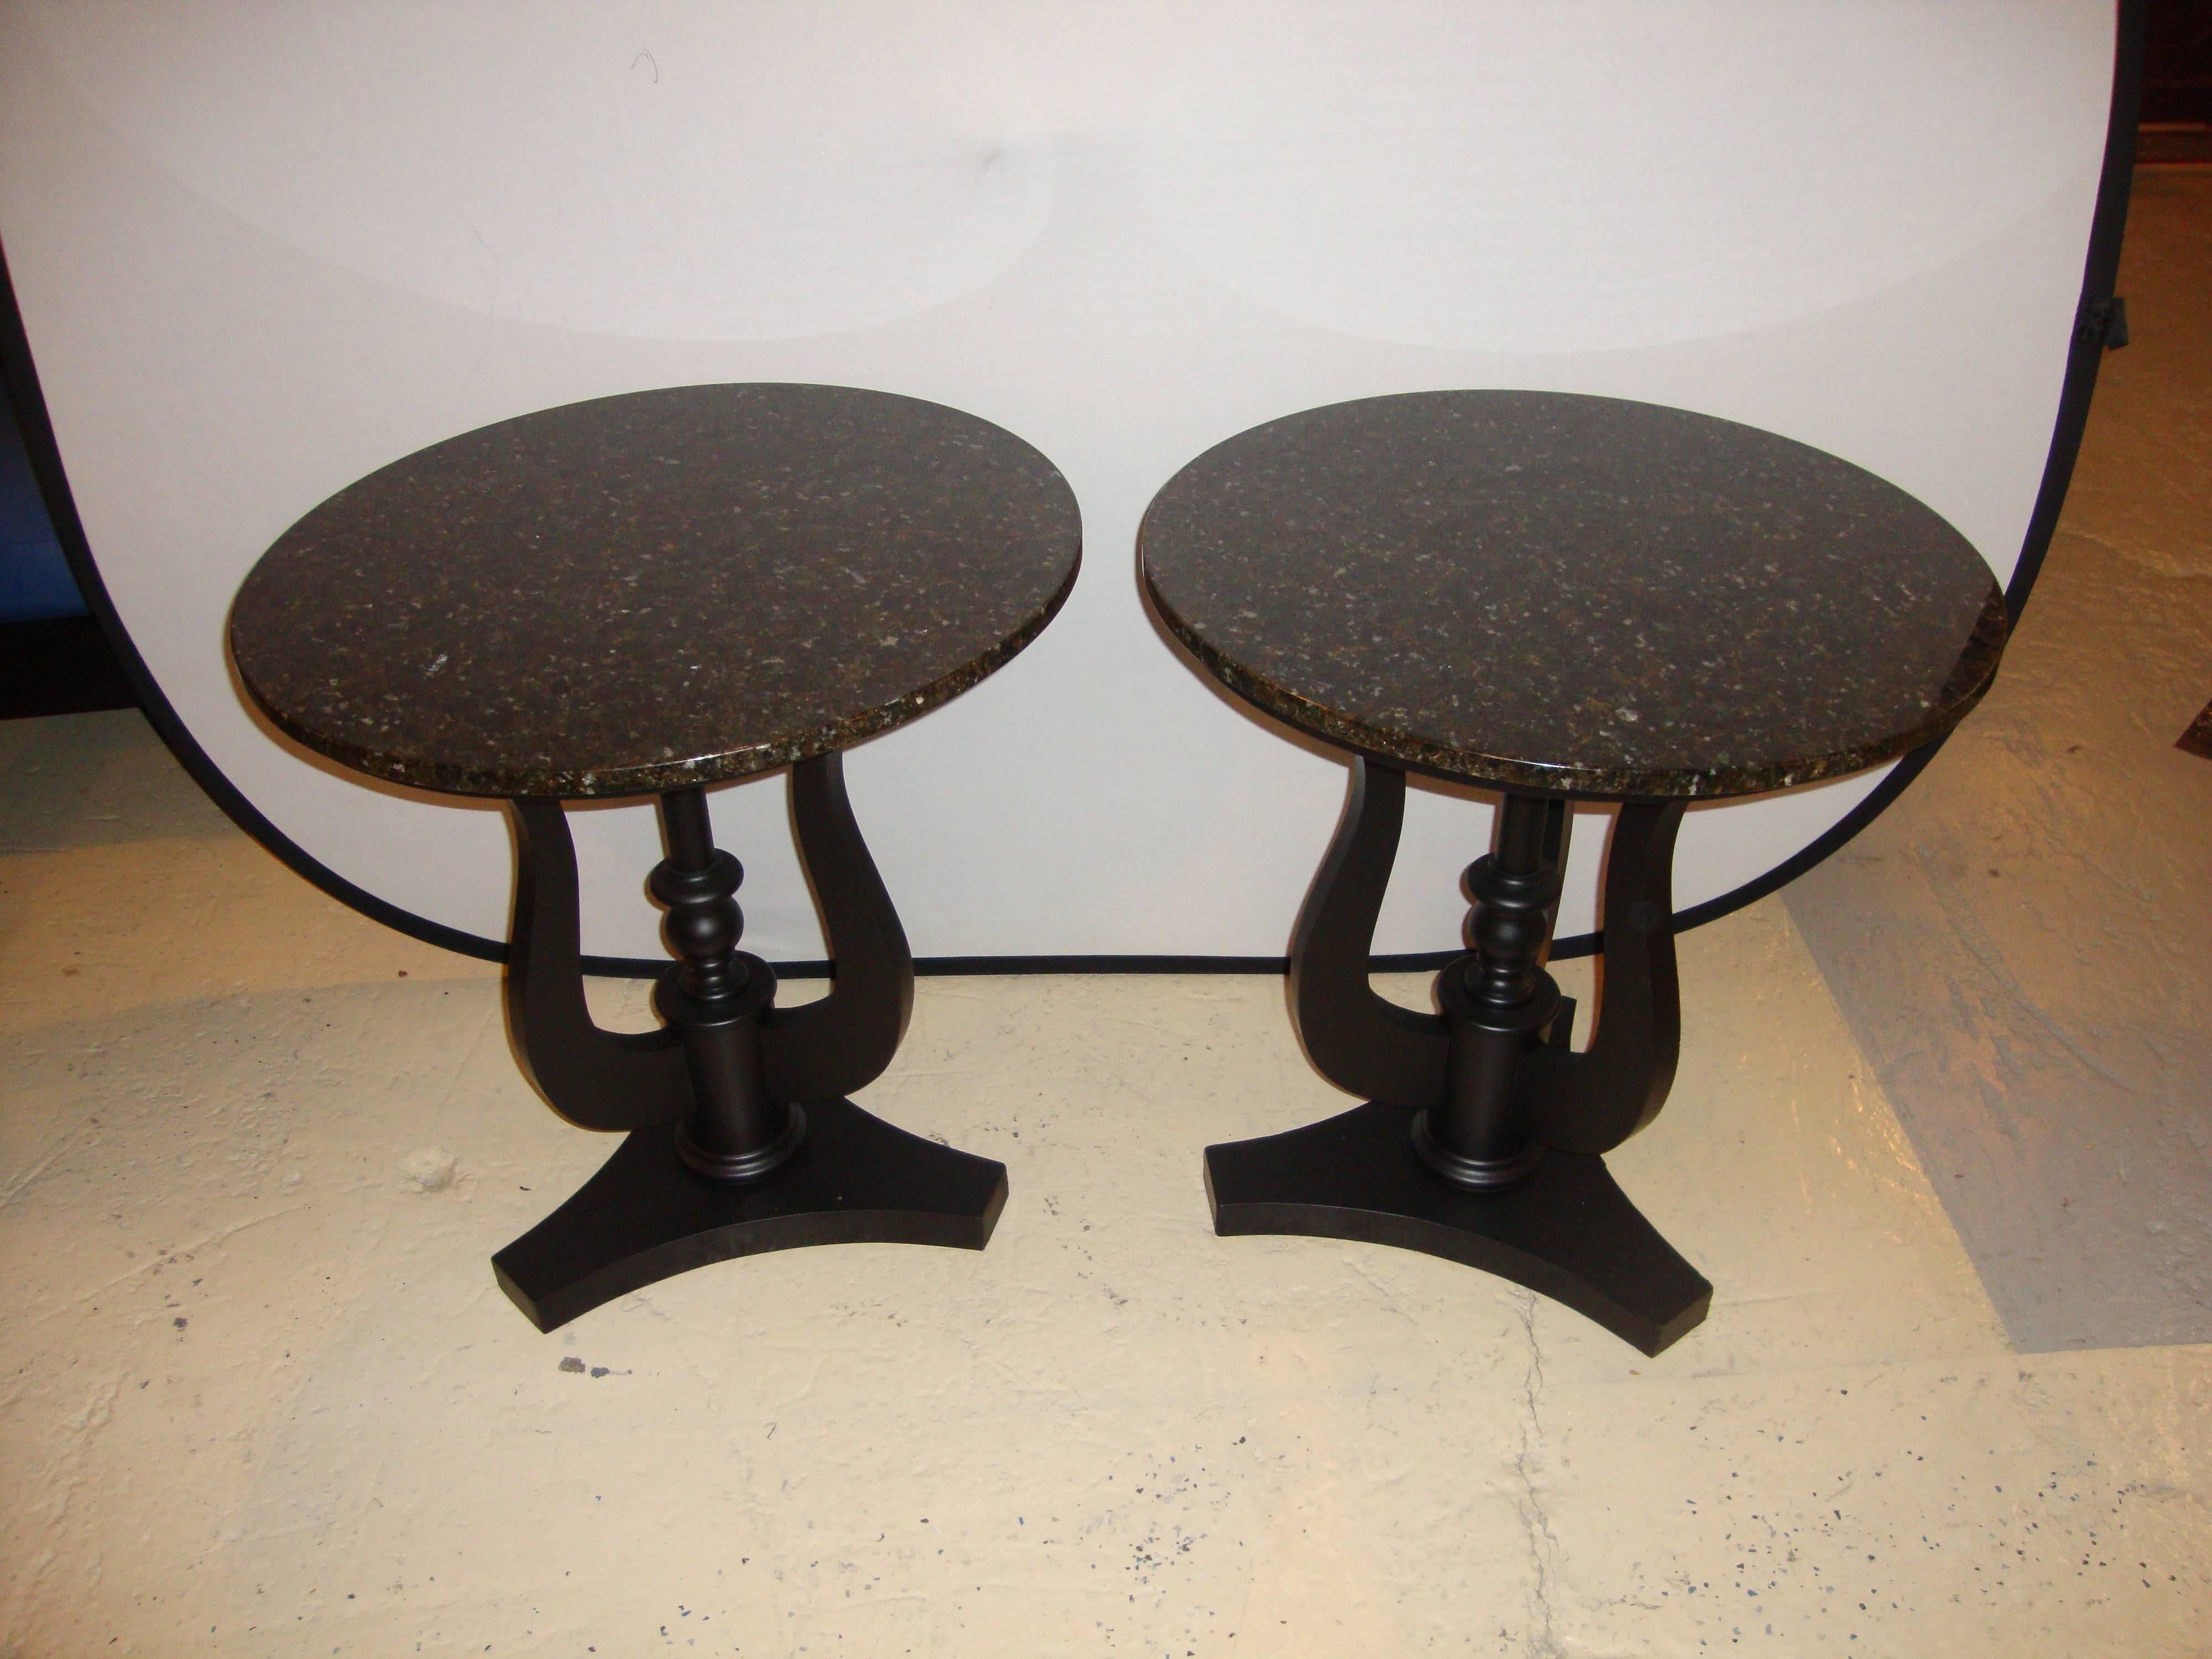 Pair of Art Deco Ebony Based End Tables with Black Marble Tops For Sale 2